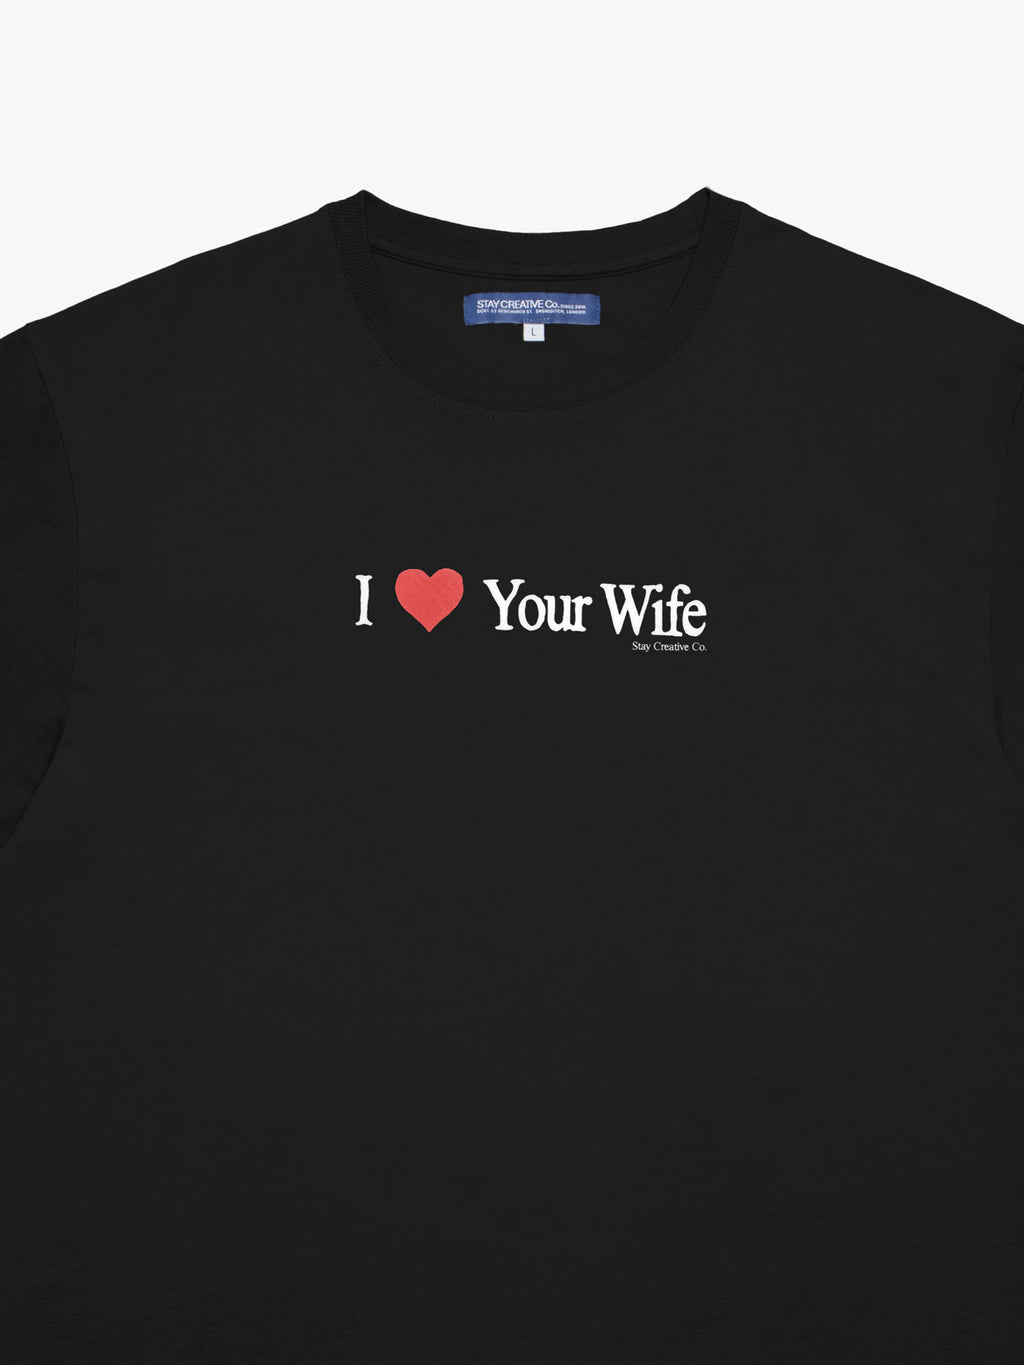 I Love Your Wife T-Shirt - Black